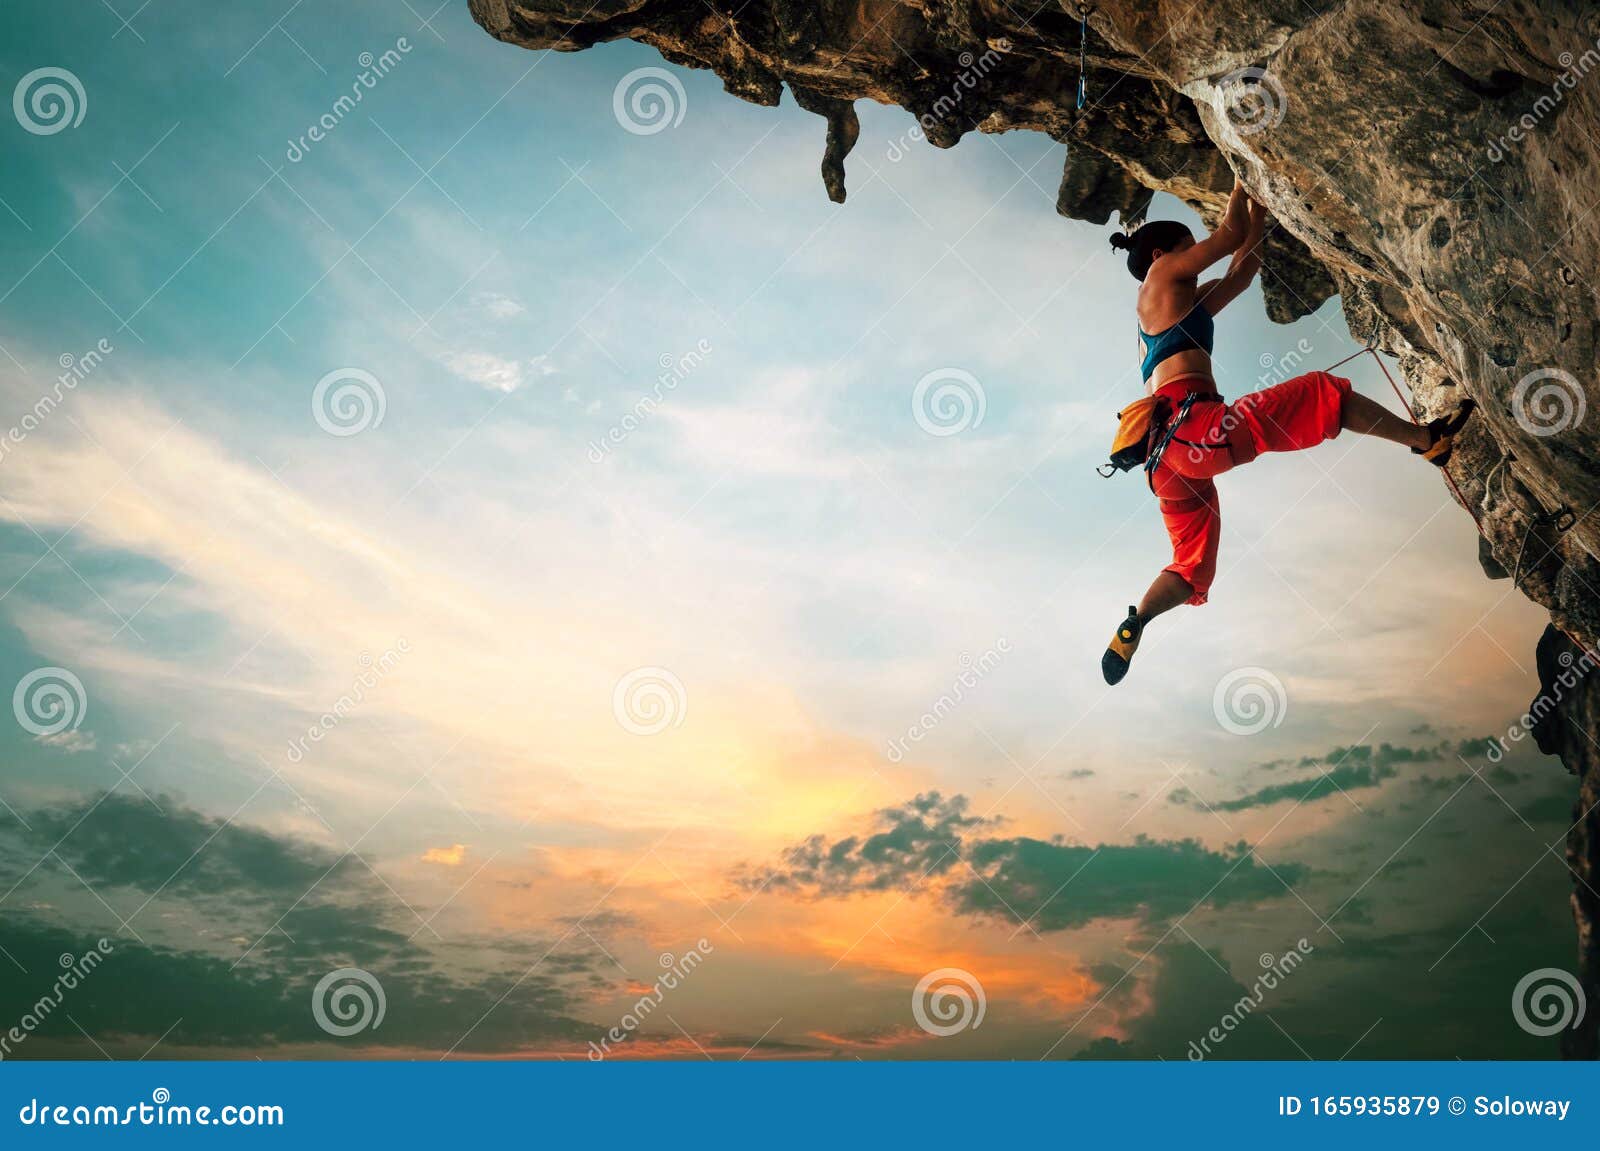 athletic woman climbing on overhanging cliff rock with sunset sky background